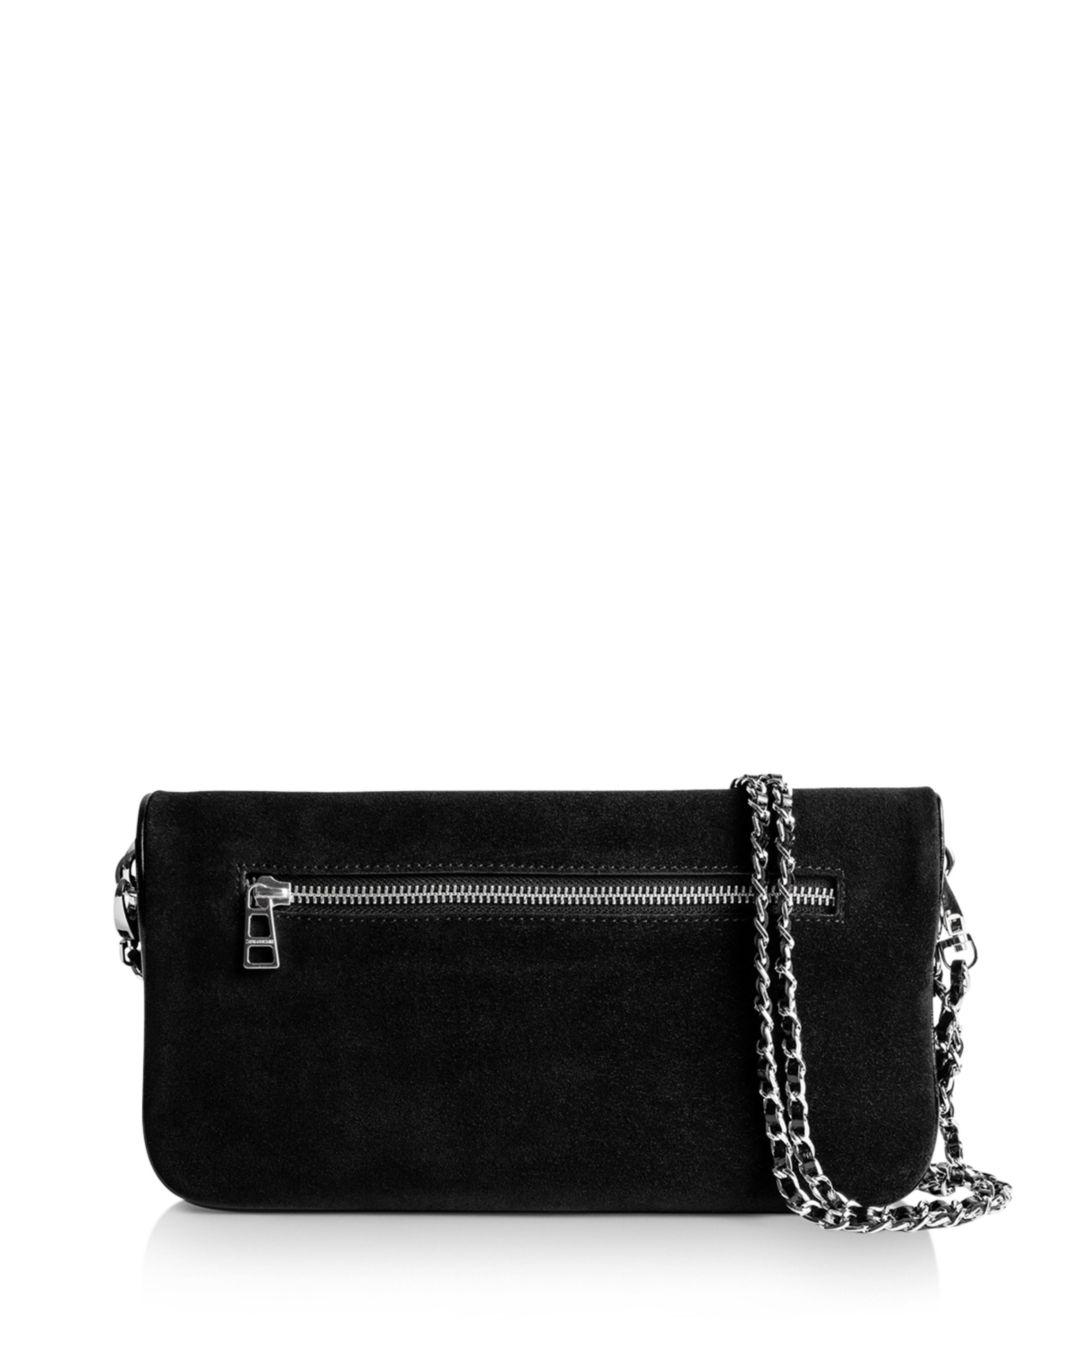 Zadig & Voltaire Leather Rock Grained Clutch in Black | Lyst